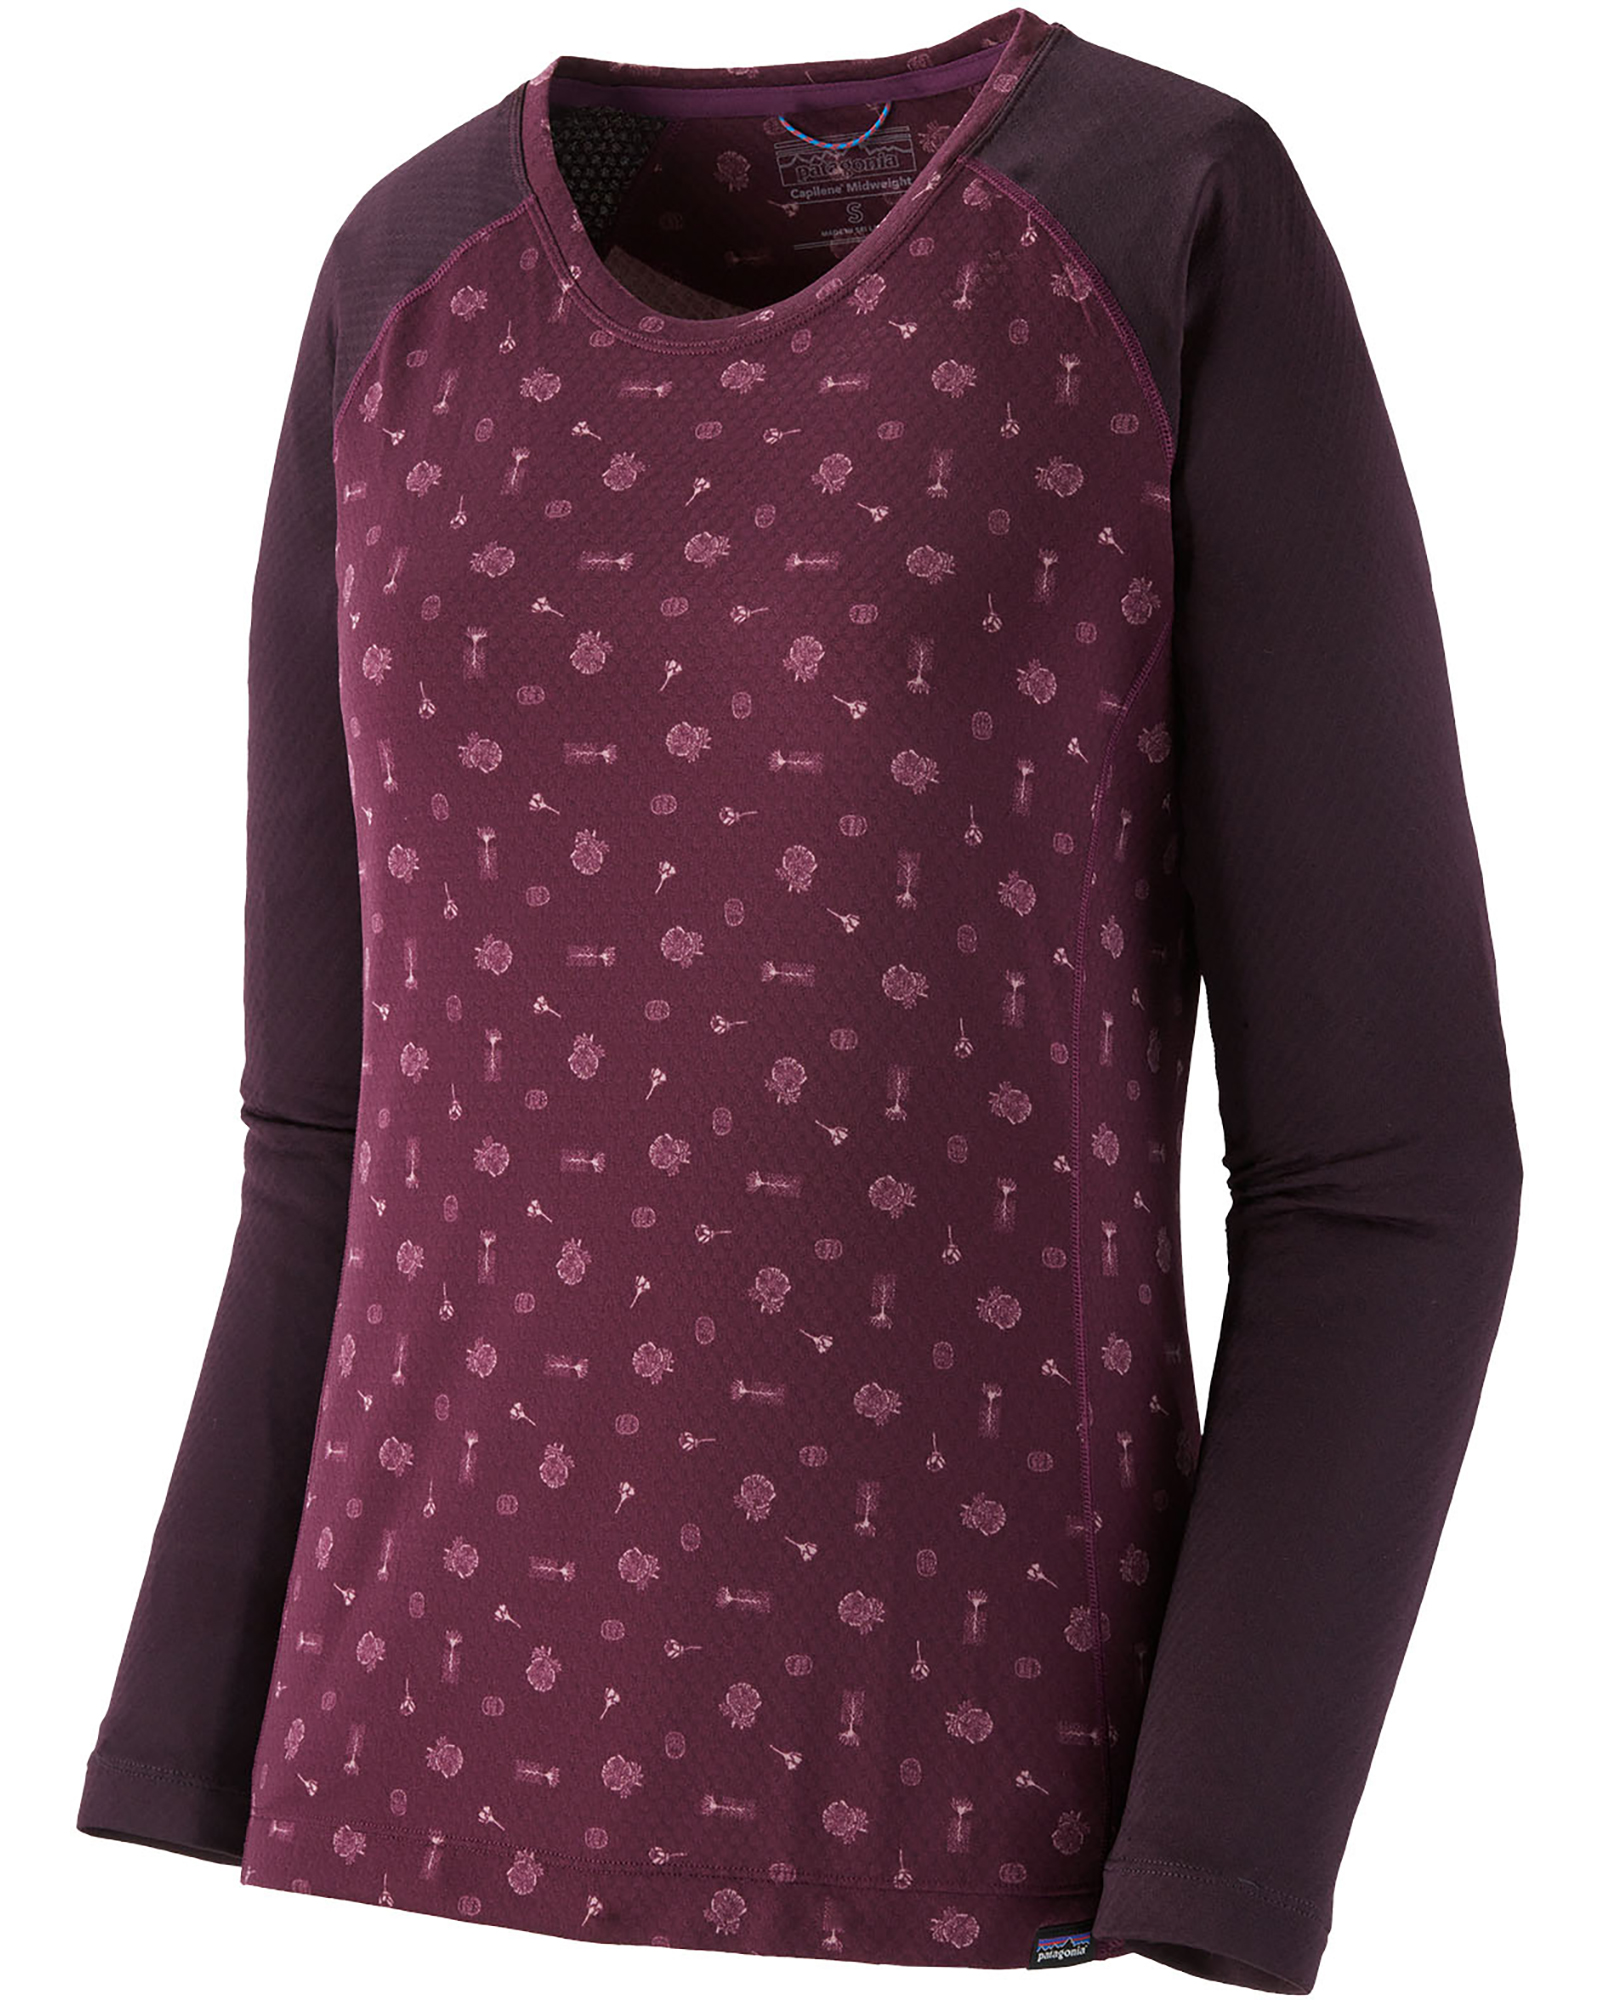 Patagonia Capilene Women’s Midweight Crew Neck - Fire Floral: Night Plum XS